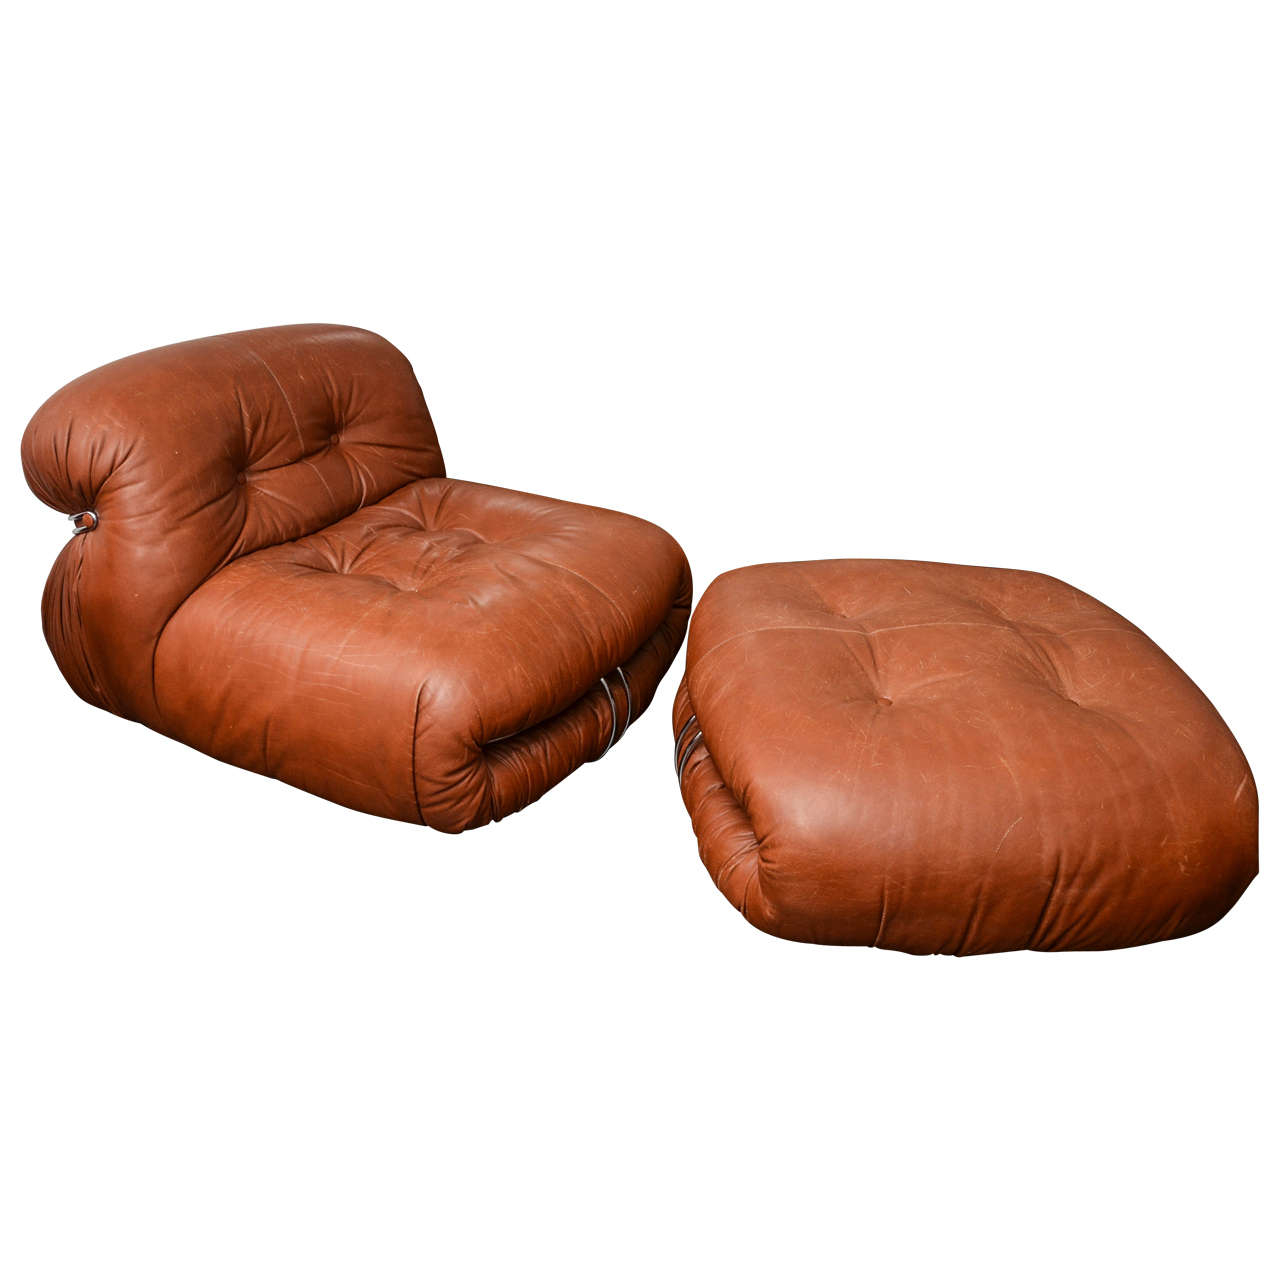 "Soriana" Tufted Leather Chair and Ottoman by Tobia Scarpa